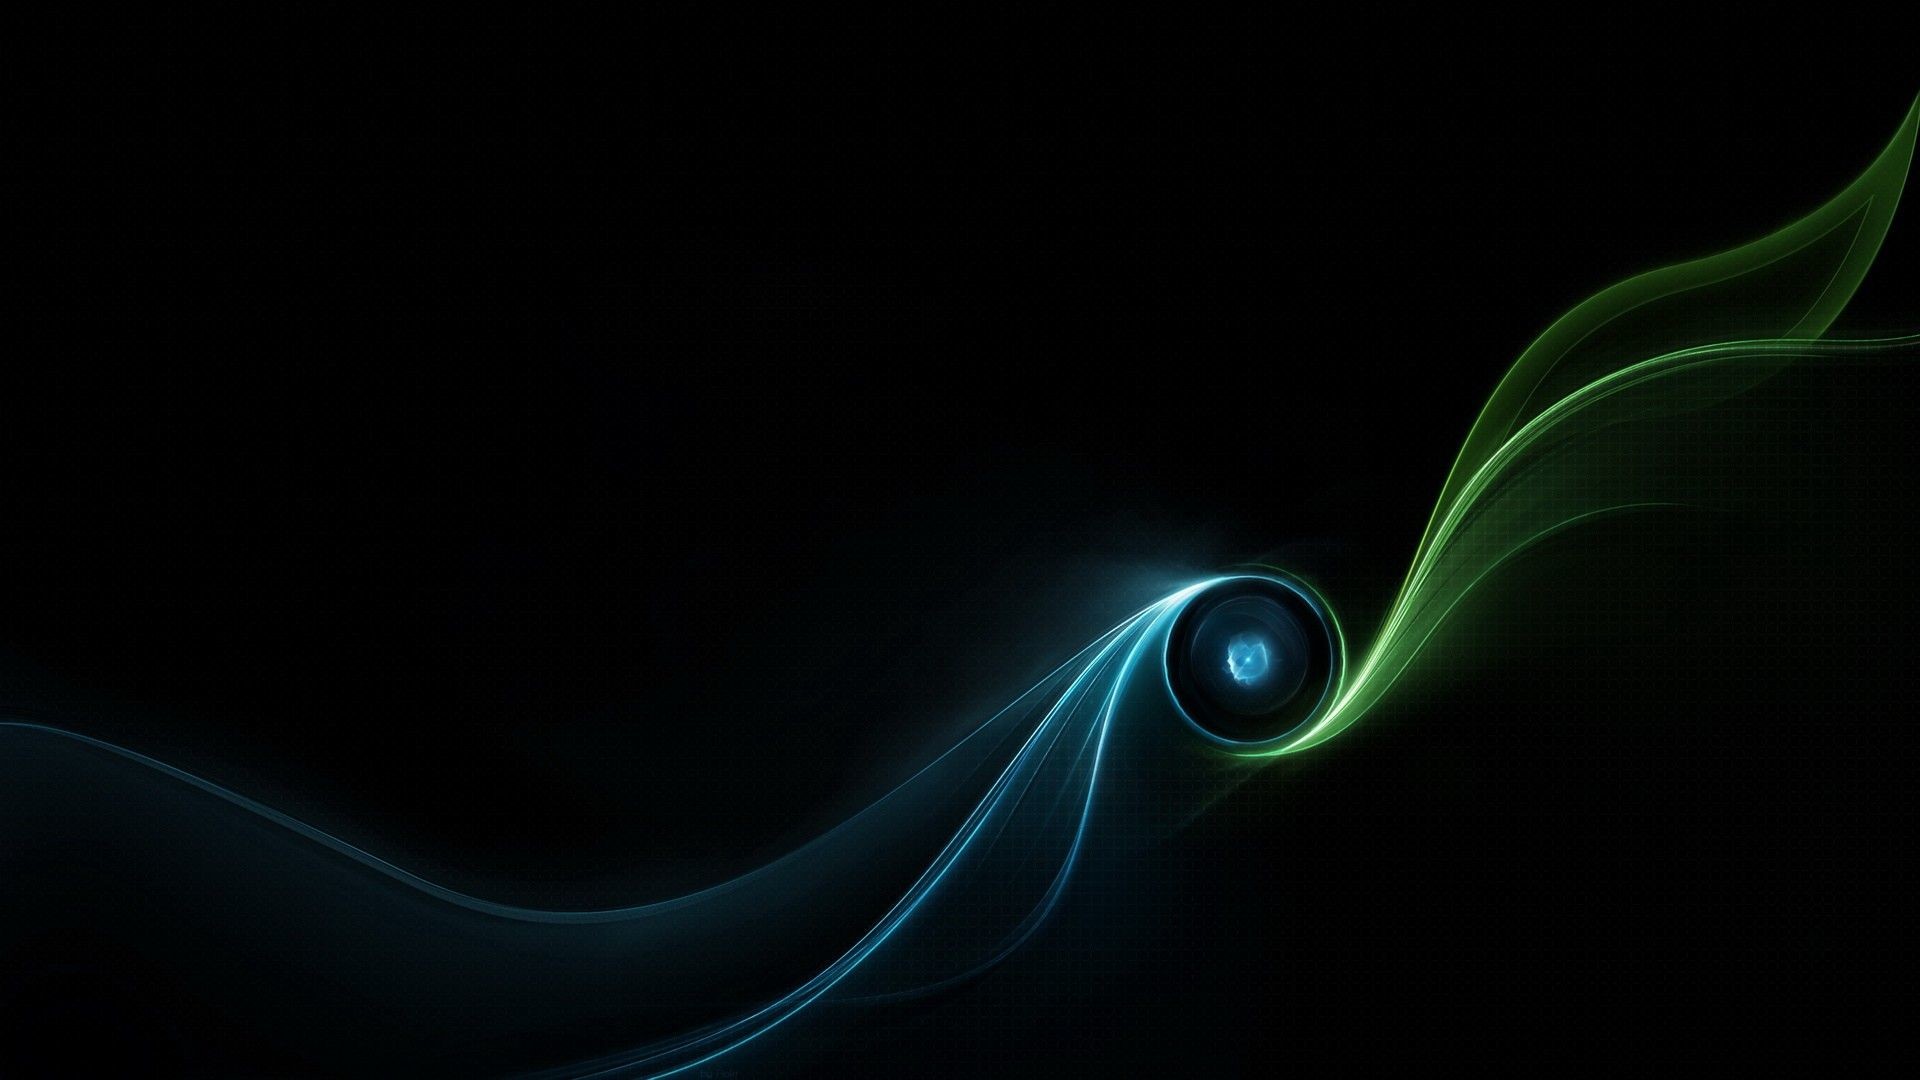 1920x1080 0 All Mobile Wallpapers Group Awesome Dark Abstract Wallpapers Mobile